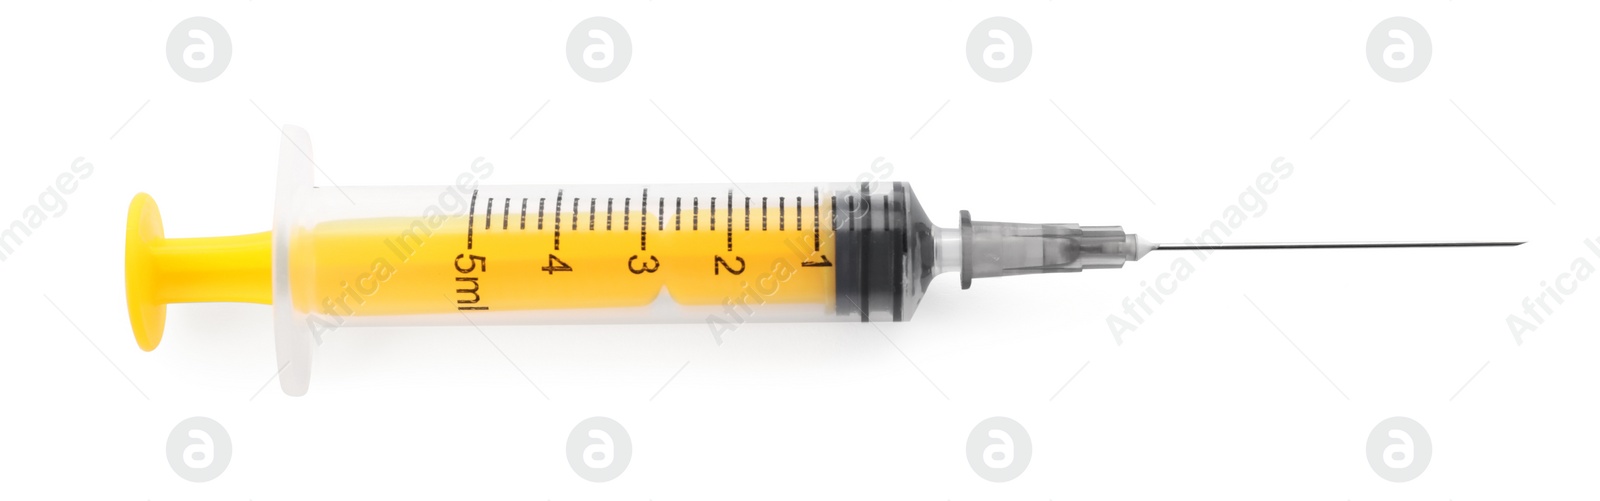 Photo of New medical syringe with needle isolated on white, top view